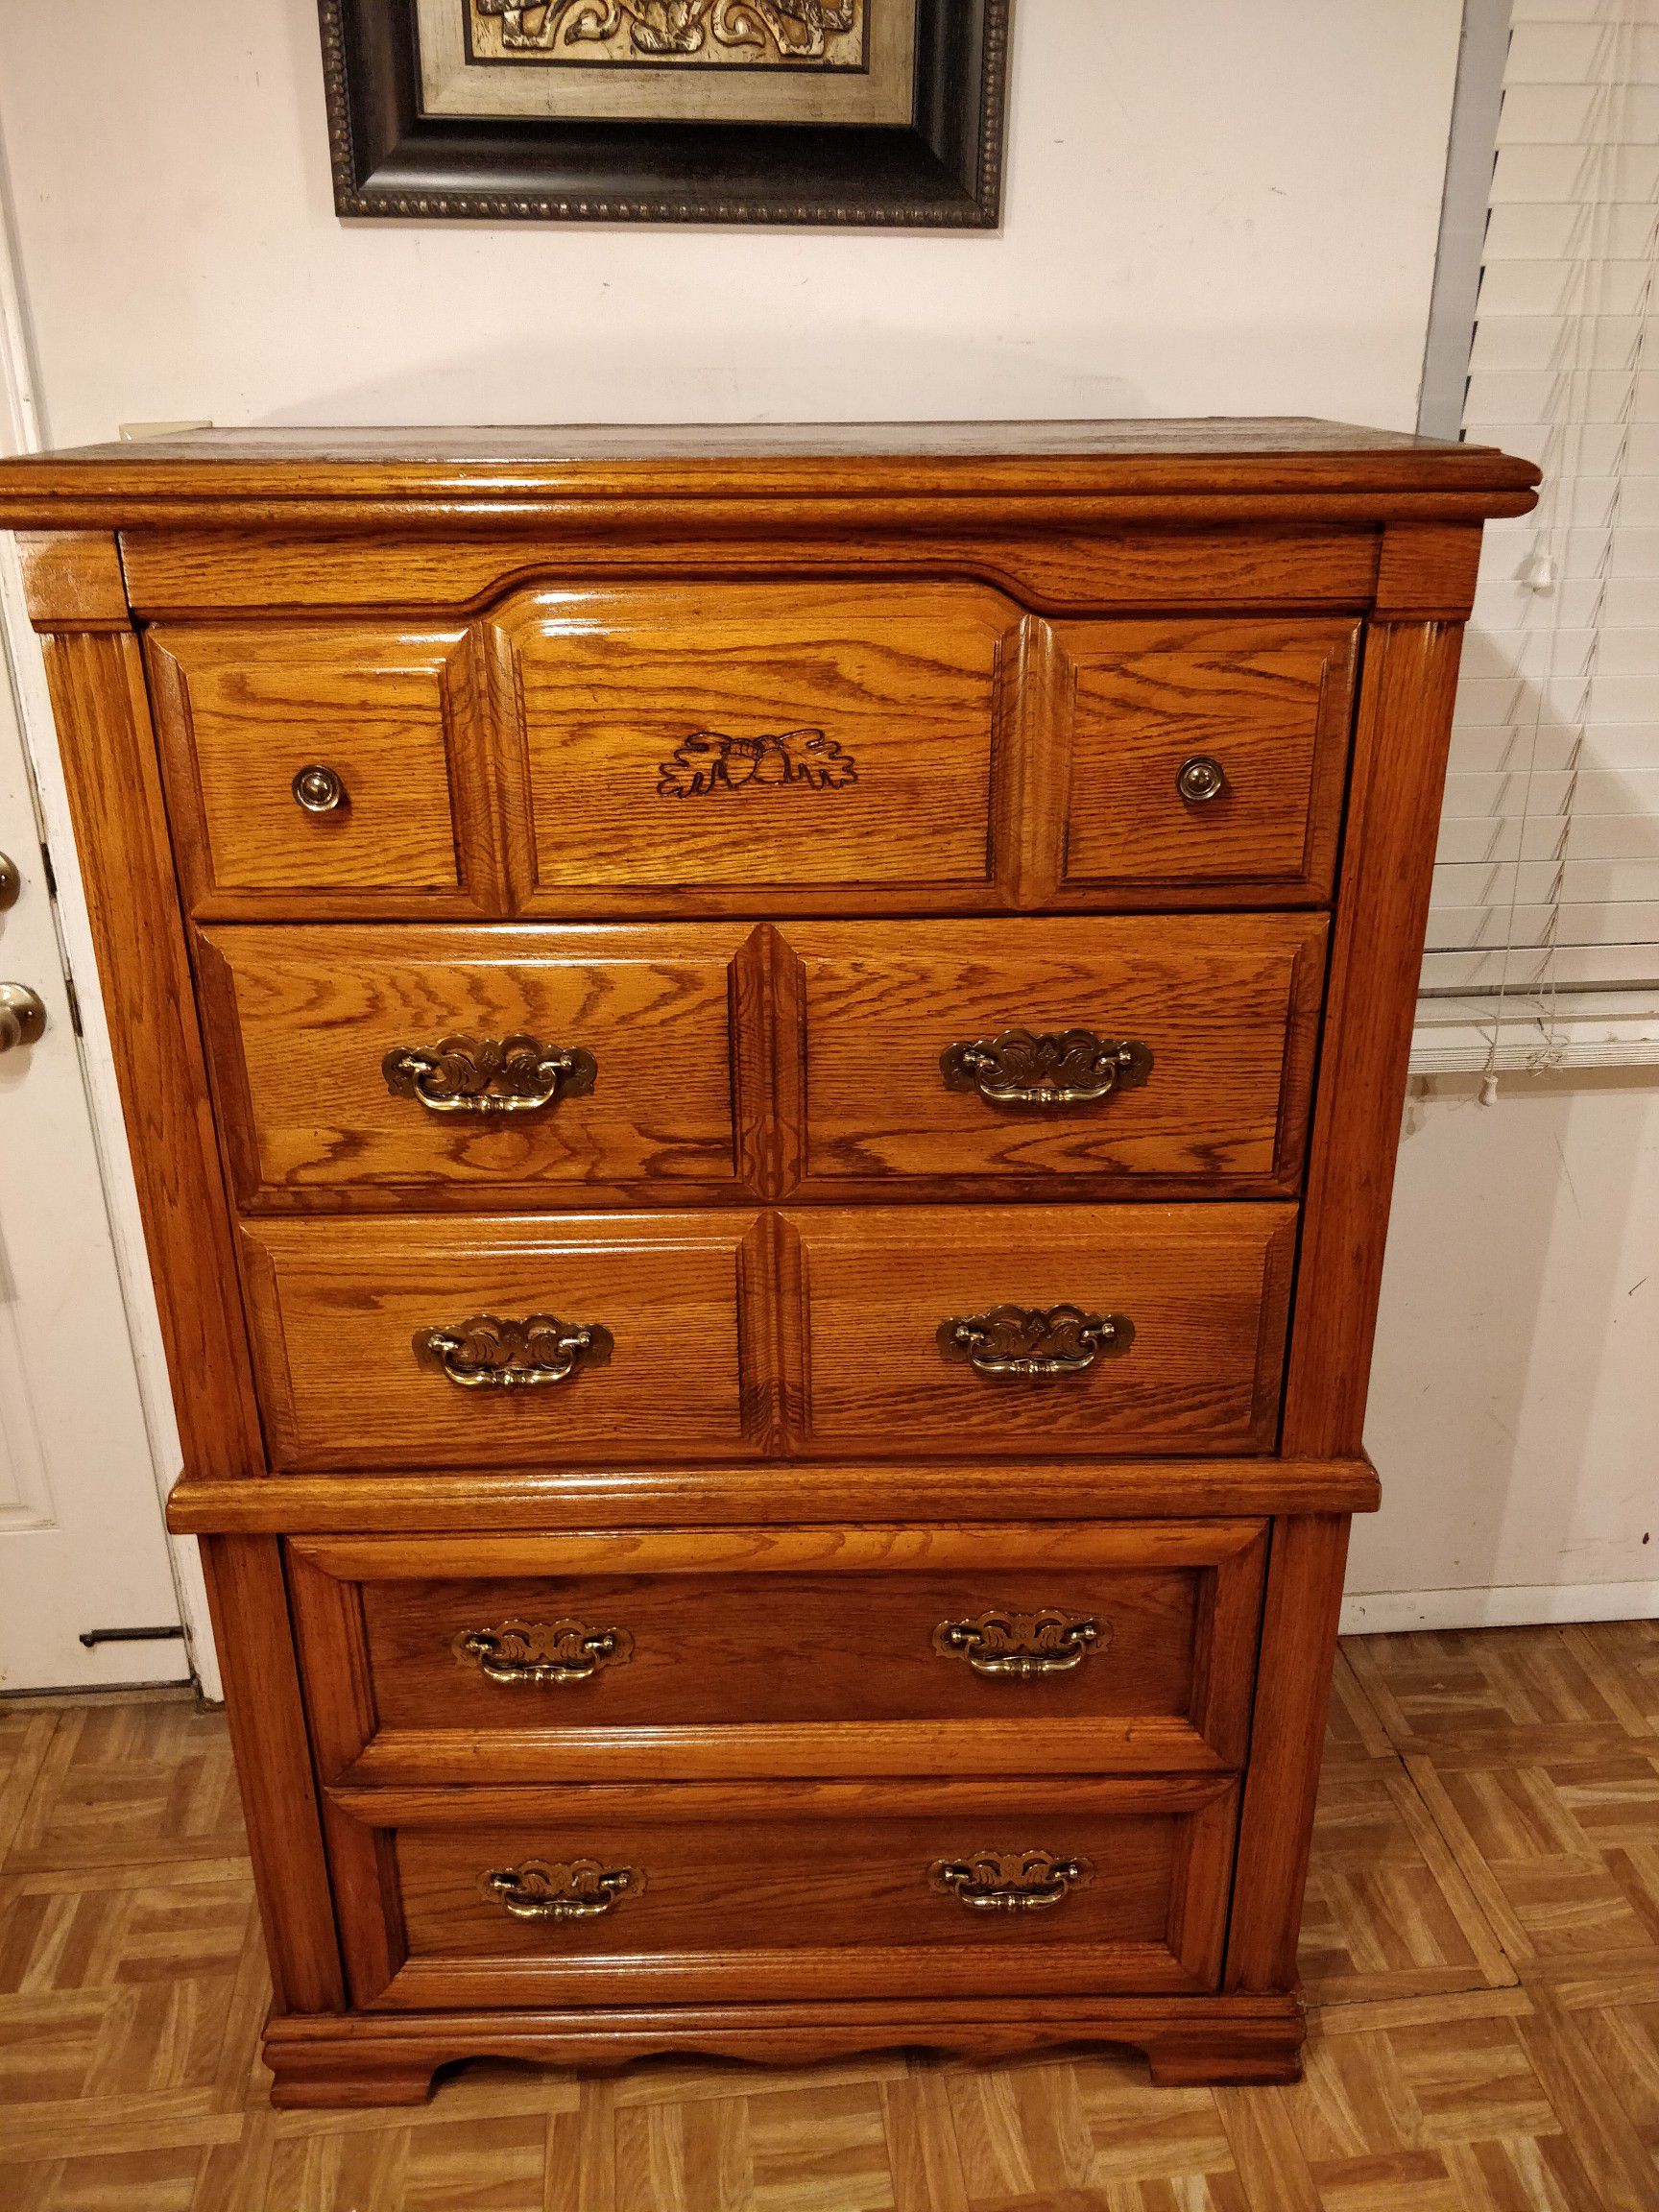 Big (BROYHILL) chest dresser with big drawers, made in USA, all drawers sliding smoothly, pet free smoke free,let me know when can you come to see it